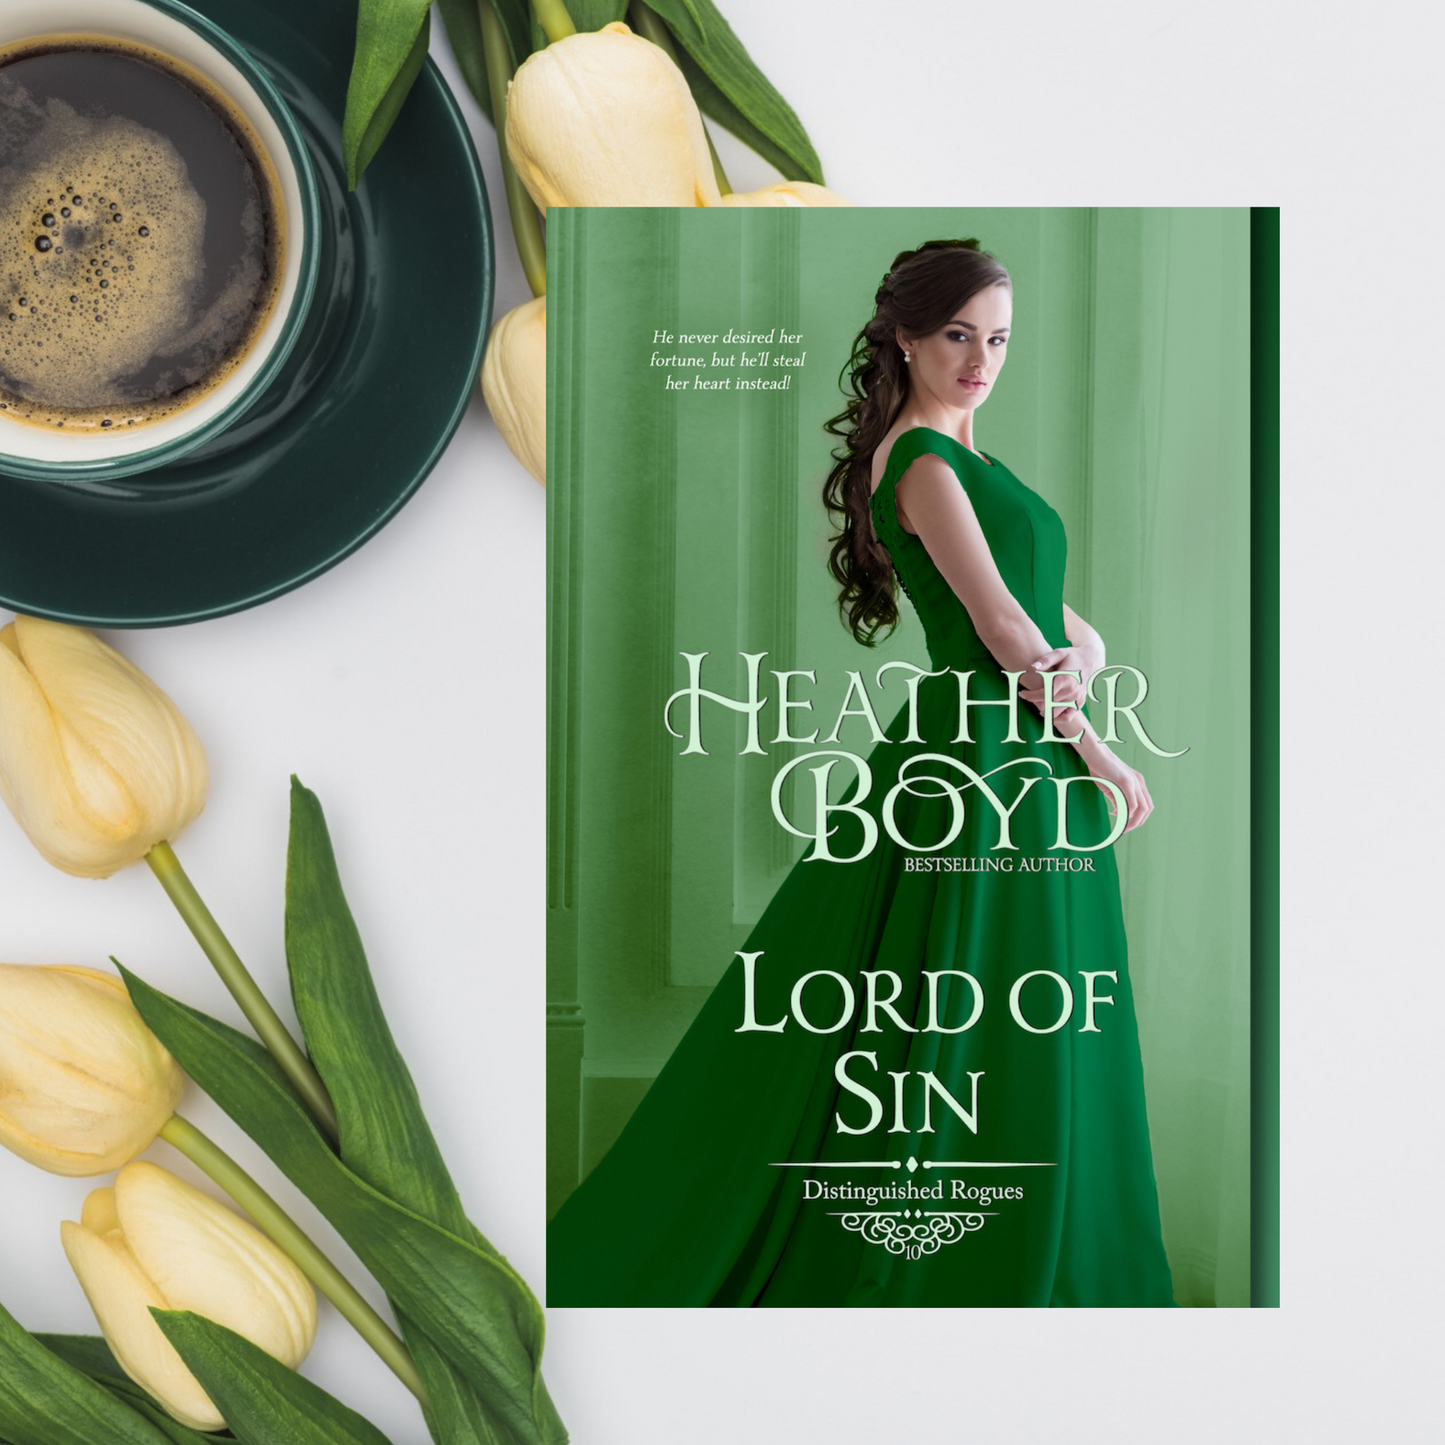 Lord of Sin (Distinguished Rogues series #10)